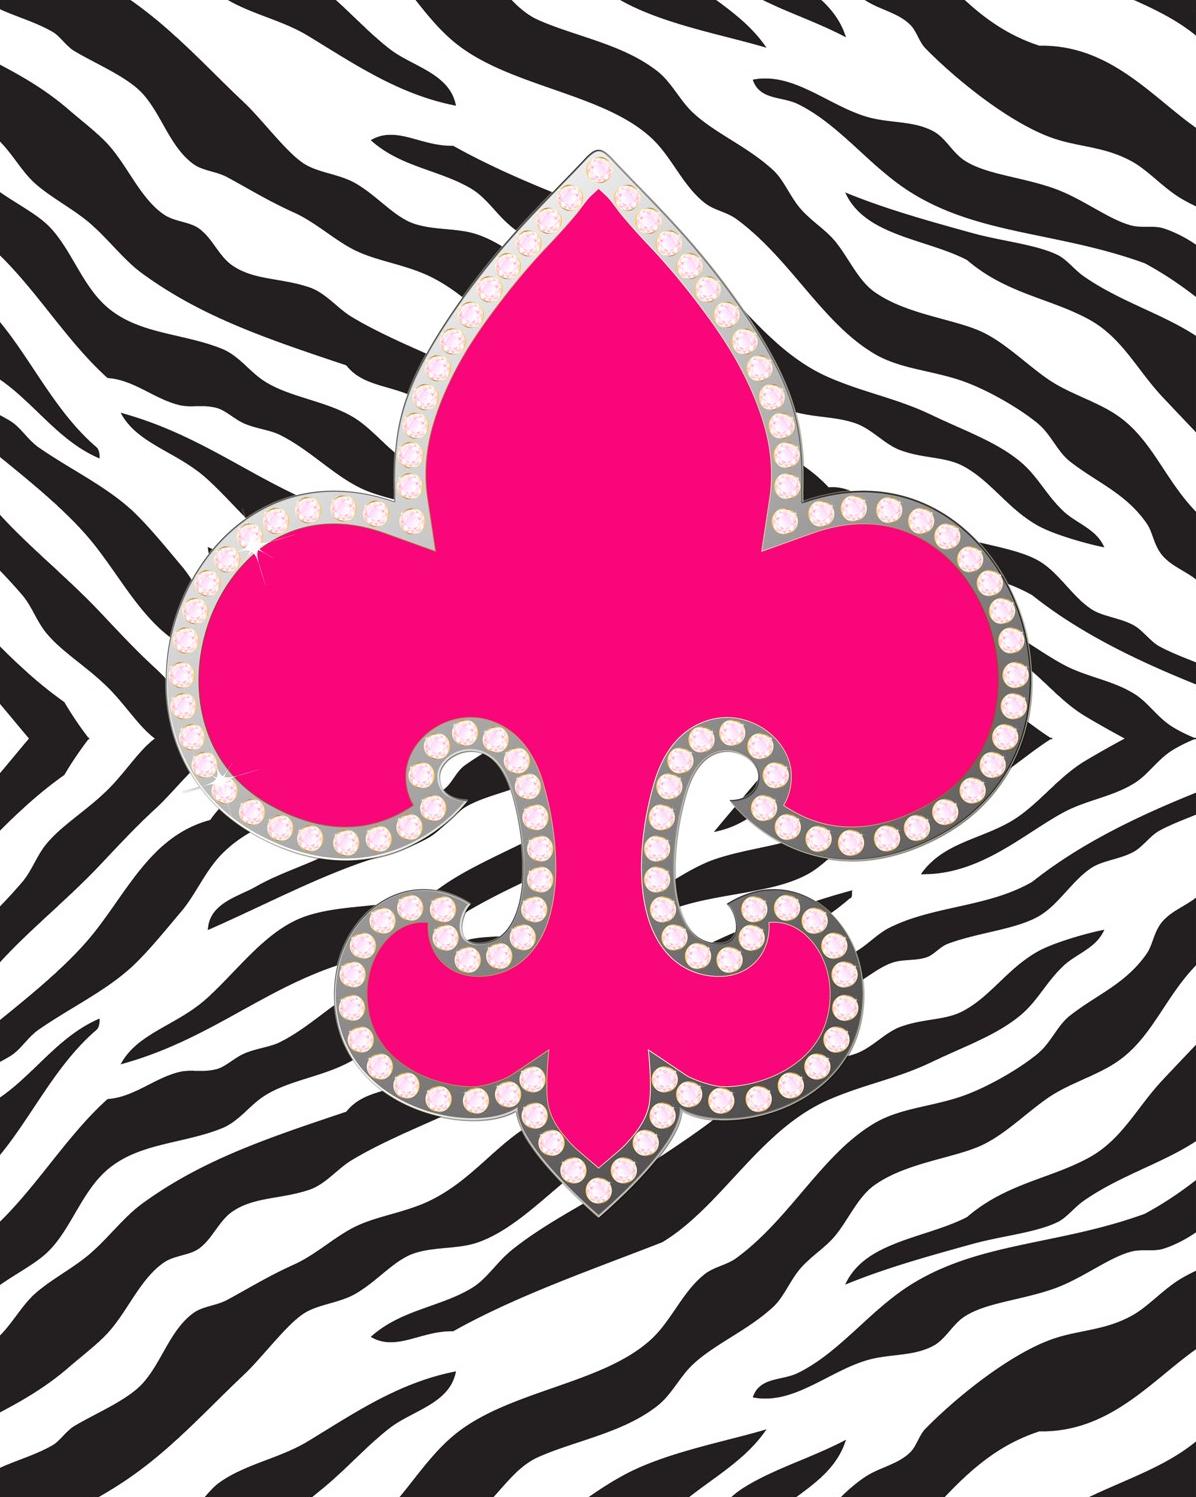 Cute Zebra Print Backgrounds Images & Pictures - Becuo